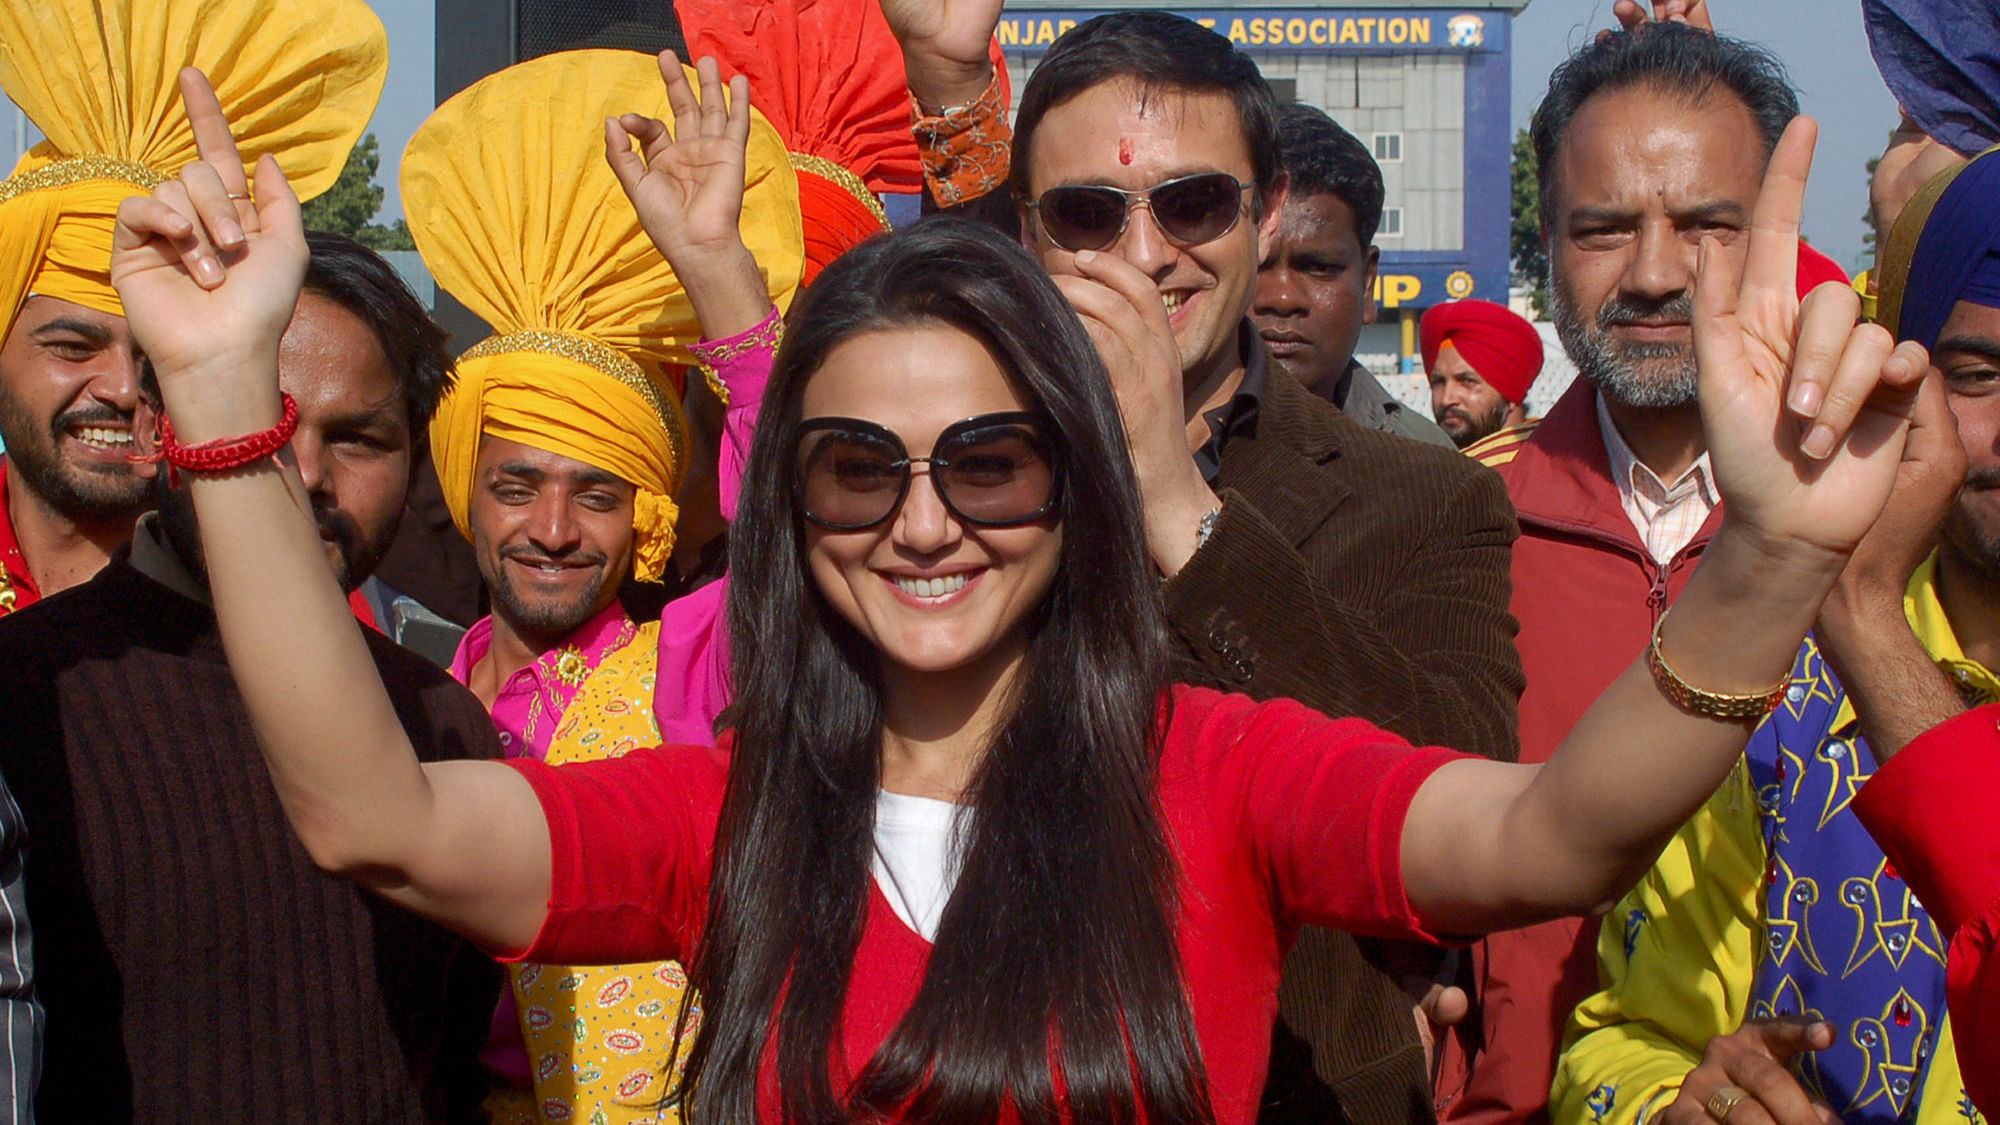 Bollywood actress Preity Zinta, franchisee of the Indian Premier League’s (IPL) Mohali team, dances after a news conference in Mohali, in the northern Indian state of Punjab February 17, 2008. (Photo: Reuters)